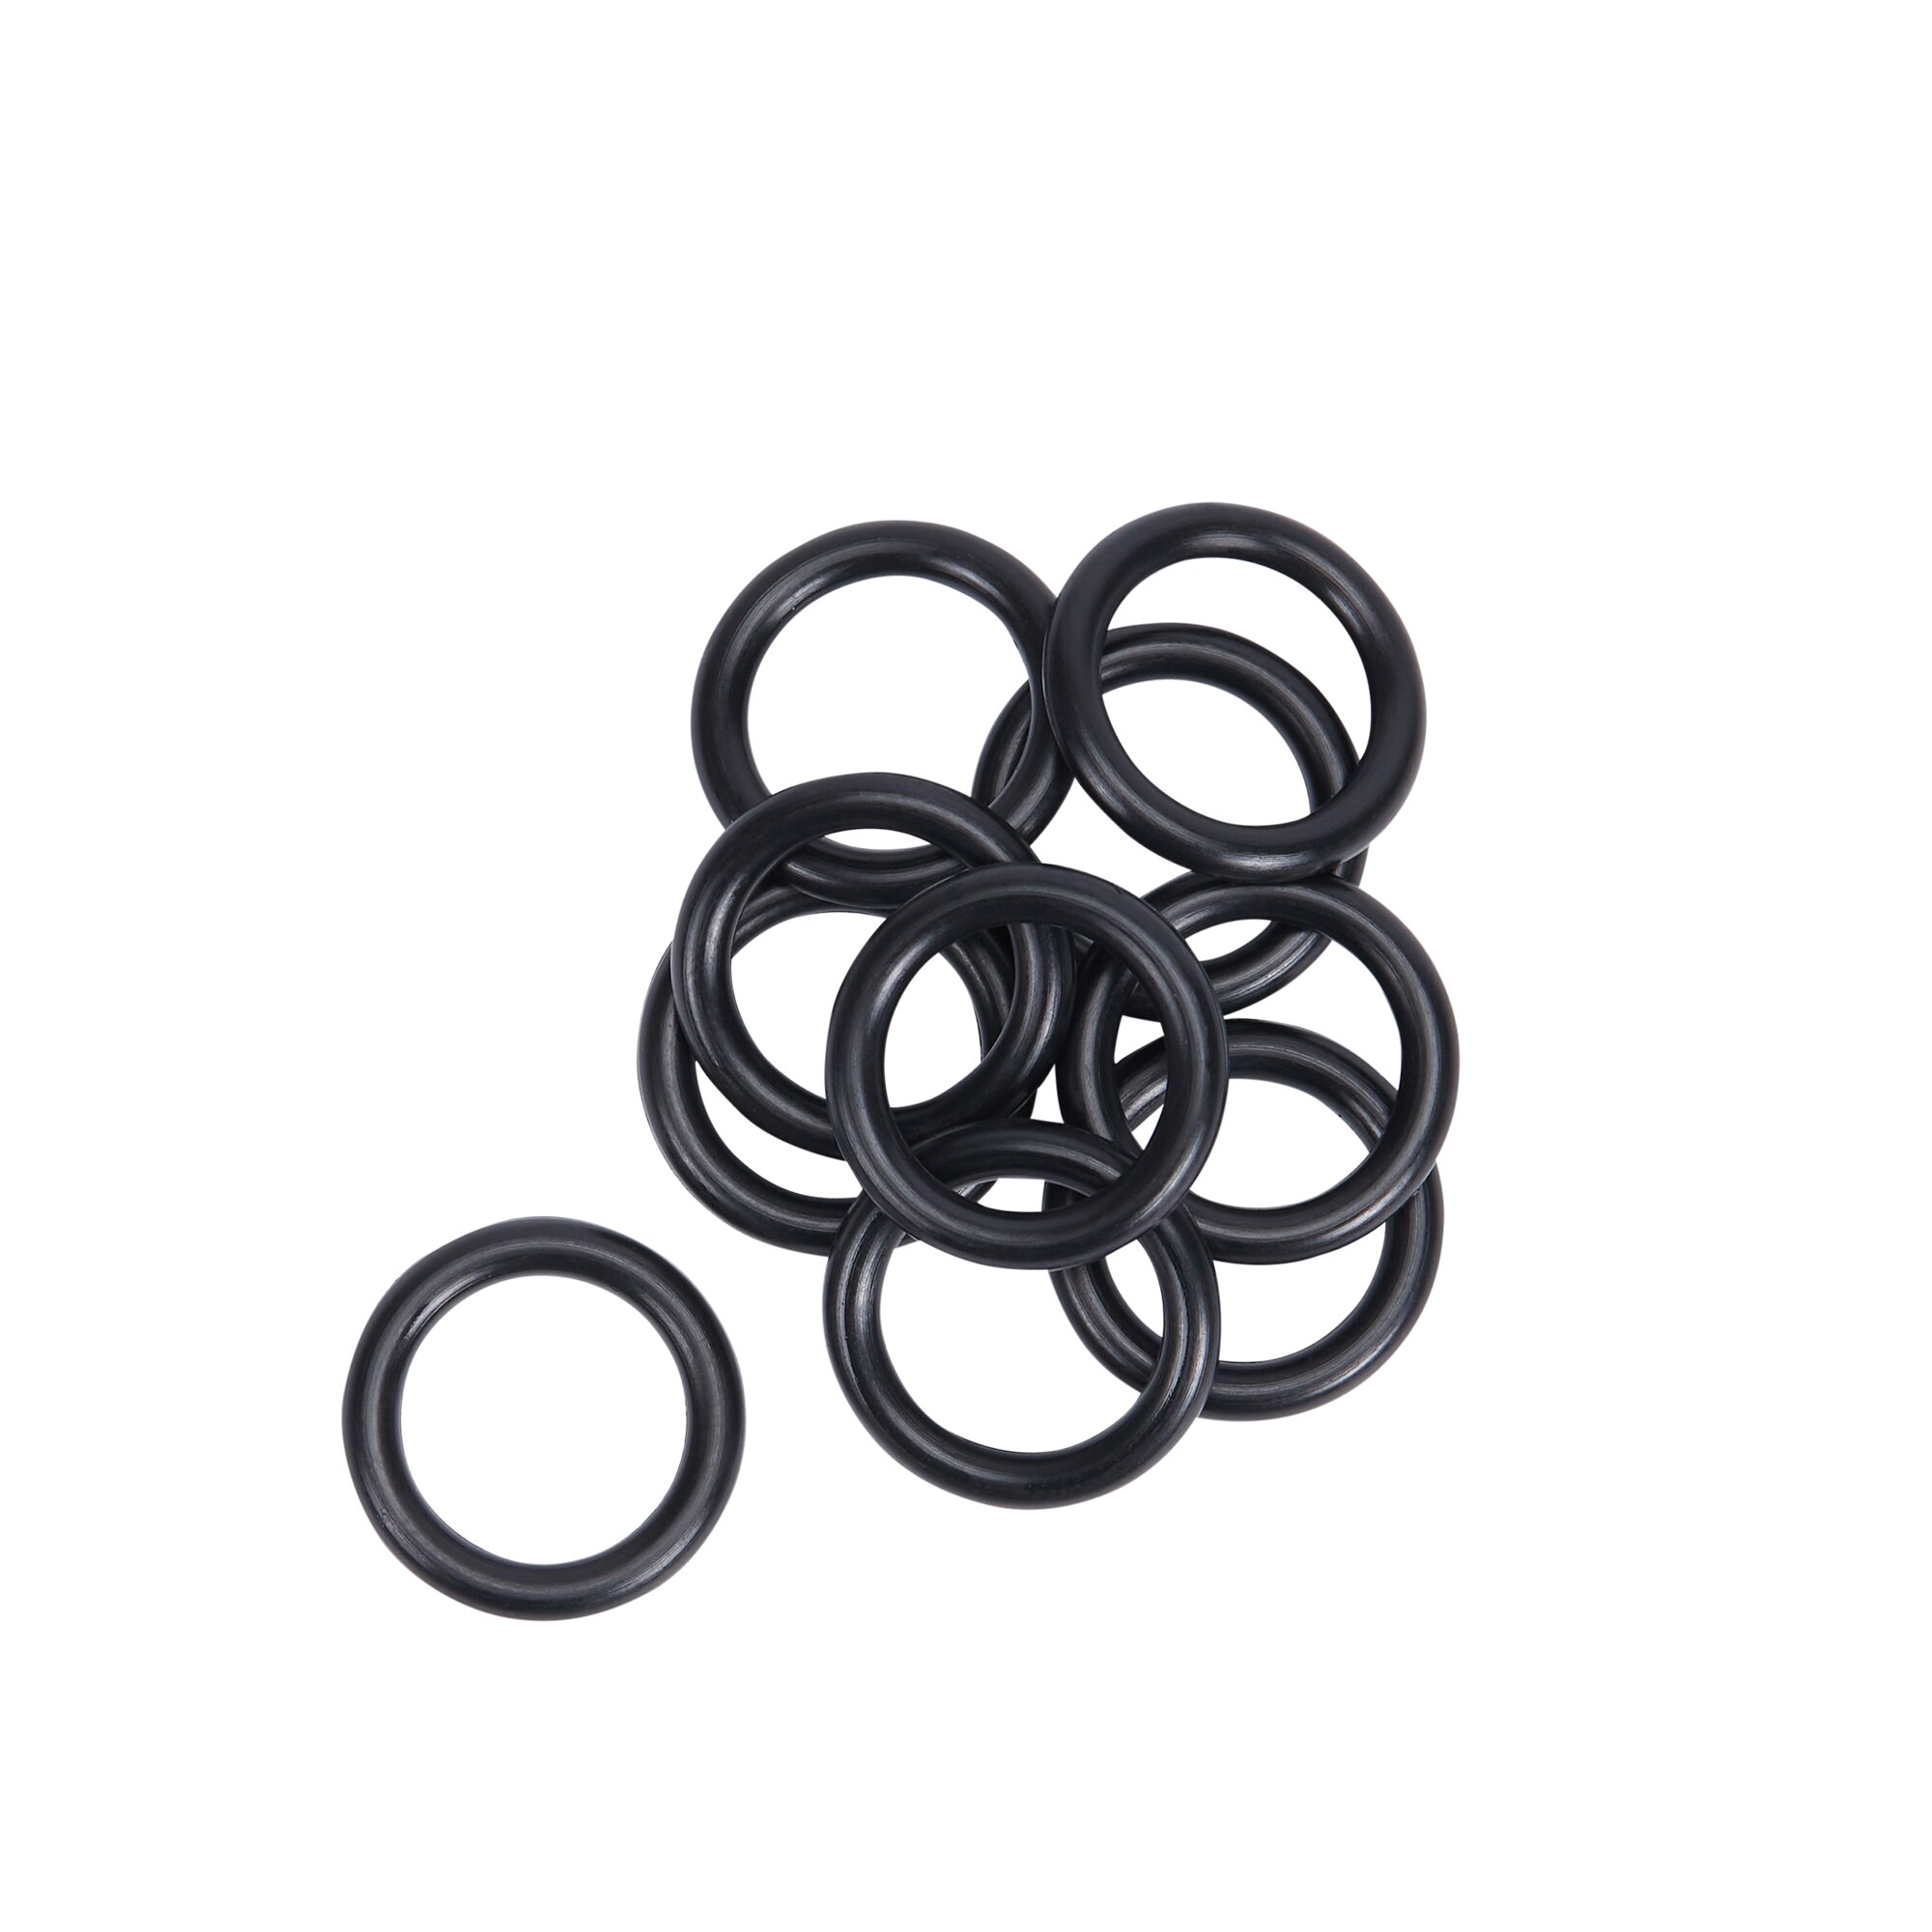 100x NBR Rubber O Ring Seal Plumbing Gasket WD 1mm OD 2.5 3 3.2 3.4 3.5 3.8 4 mm 